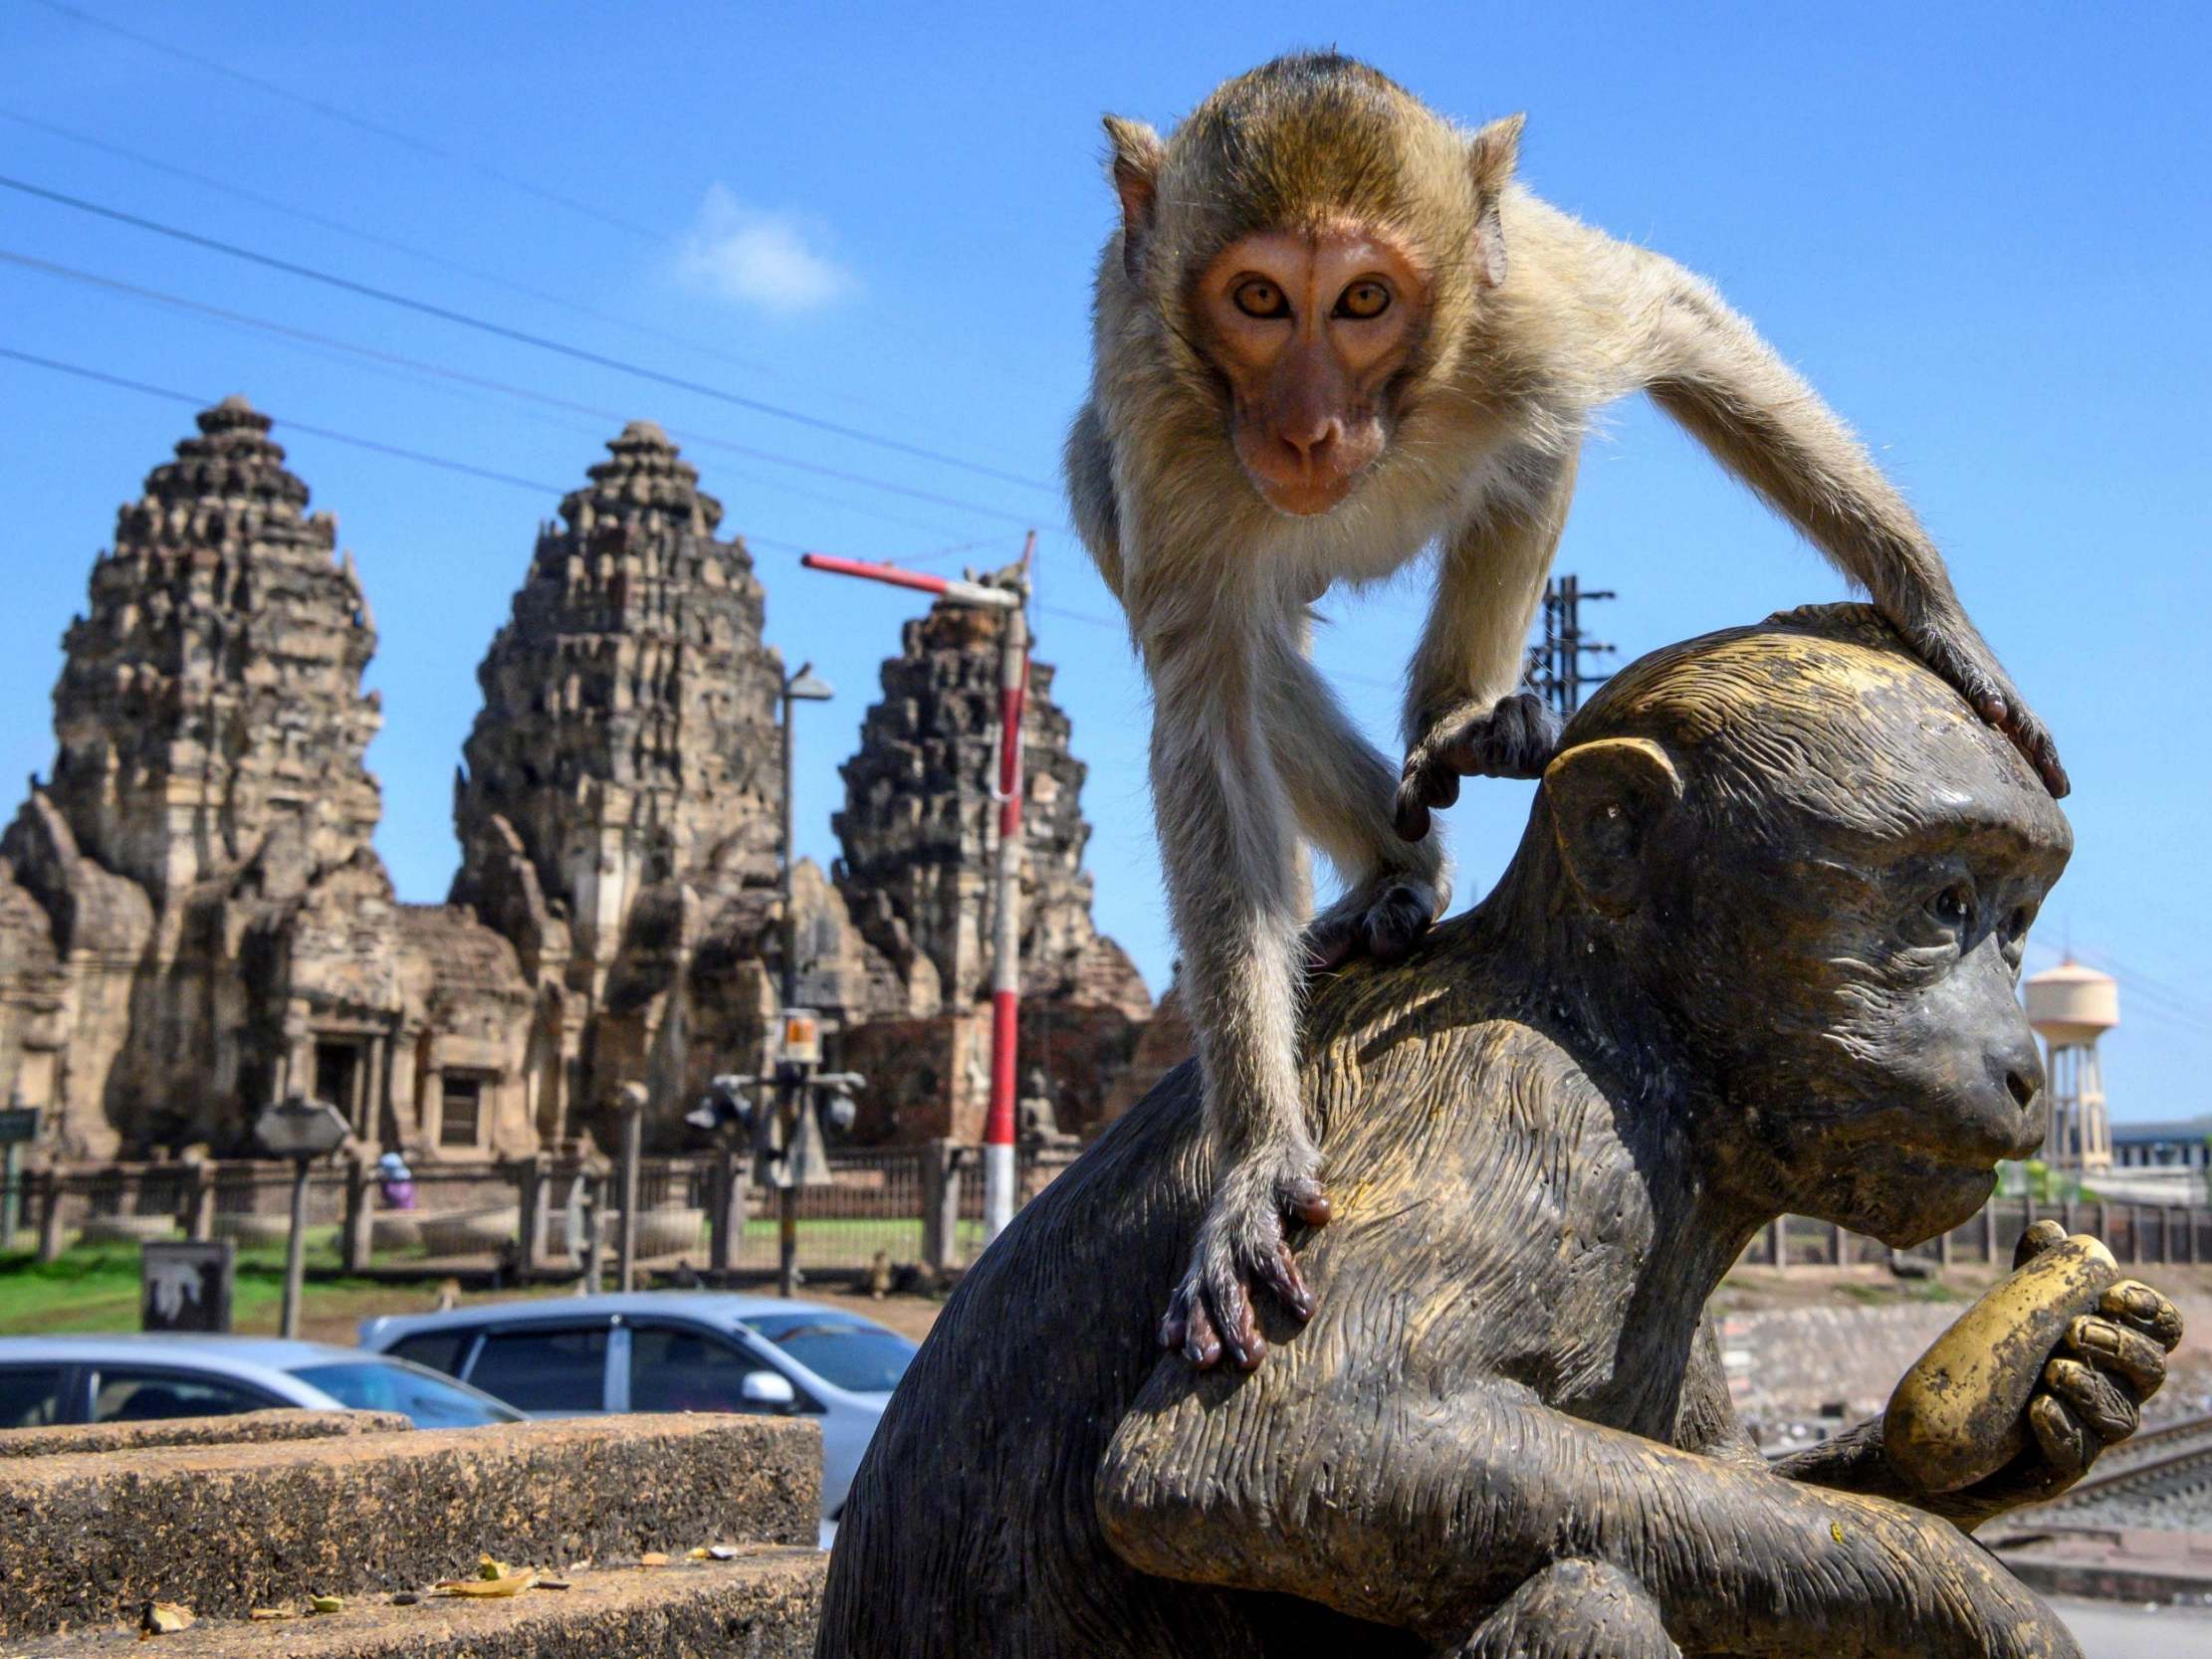 Once revered, the monkeys have now taken over the heart of the city